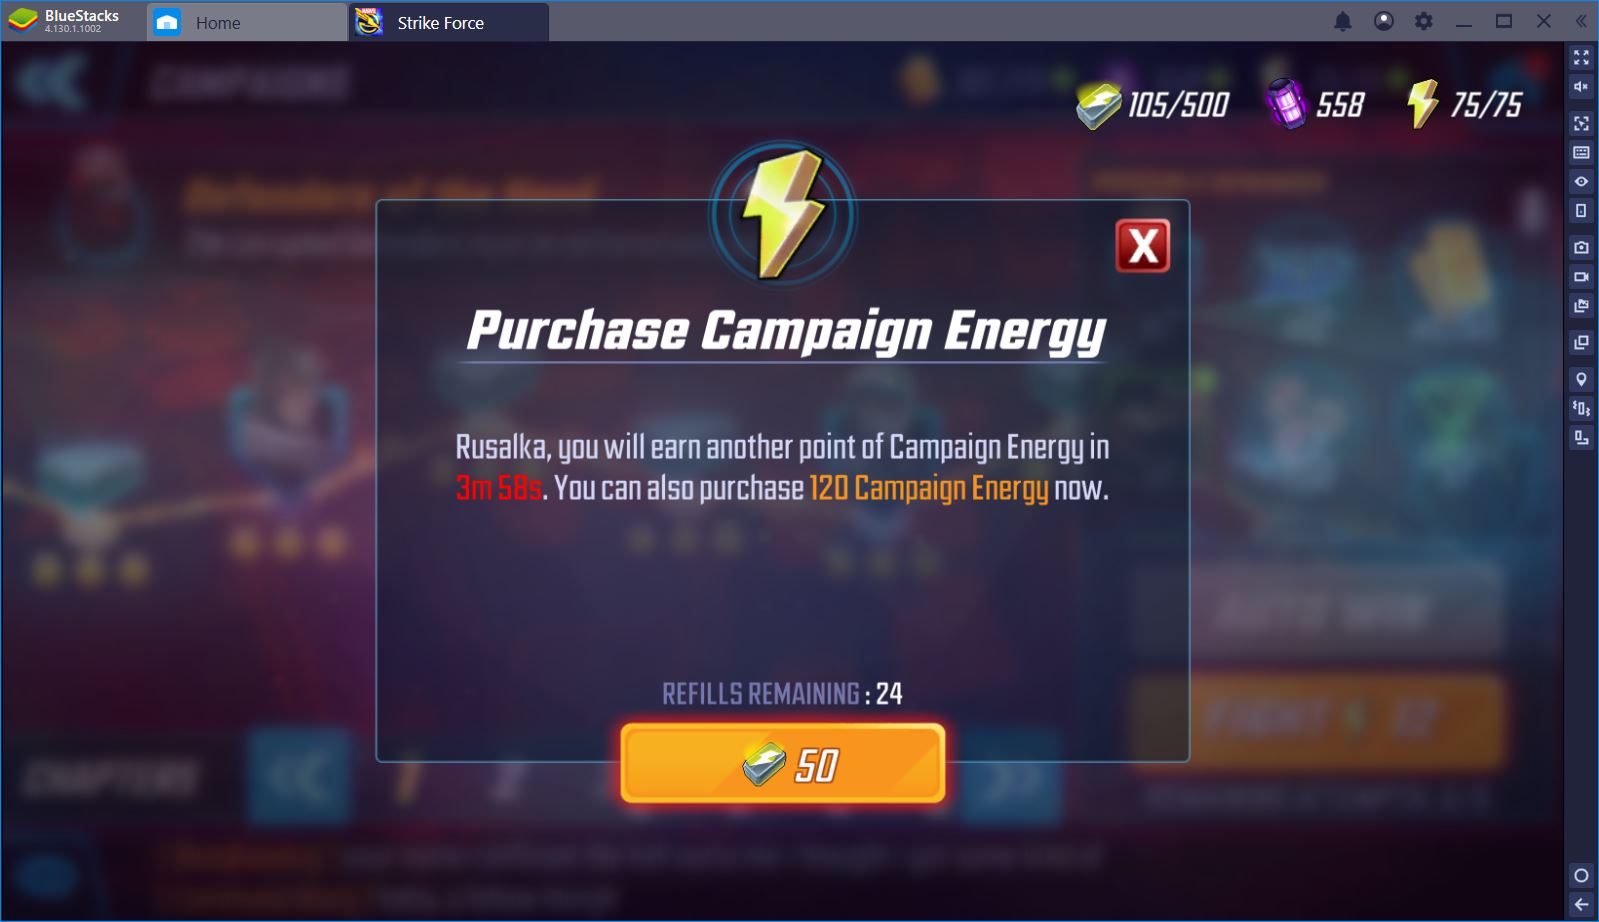 $1 for 2000 Cores - Free Rewards - Website Launch Offers - MARVEL Strike  Force - MSF 